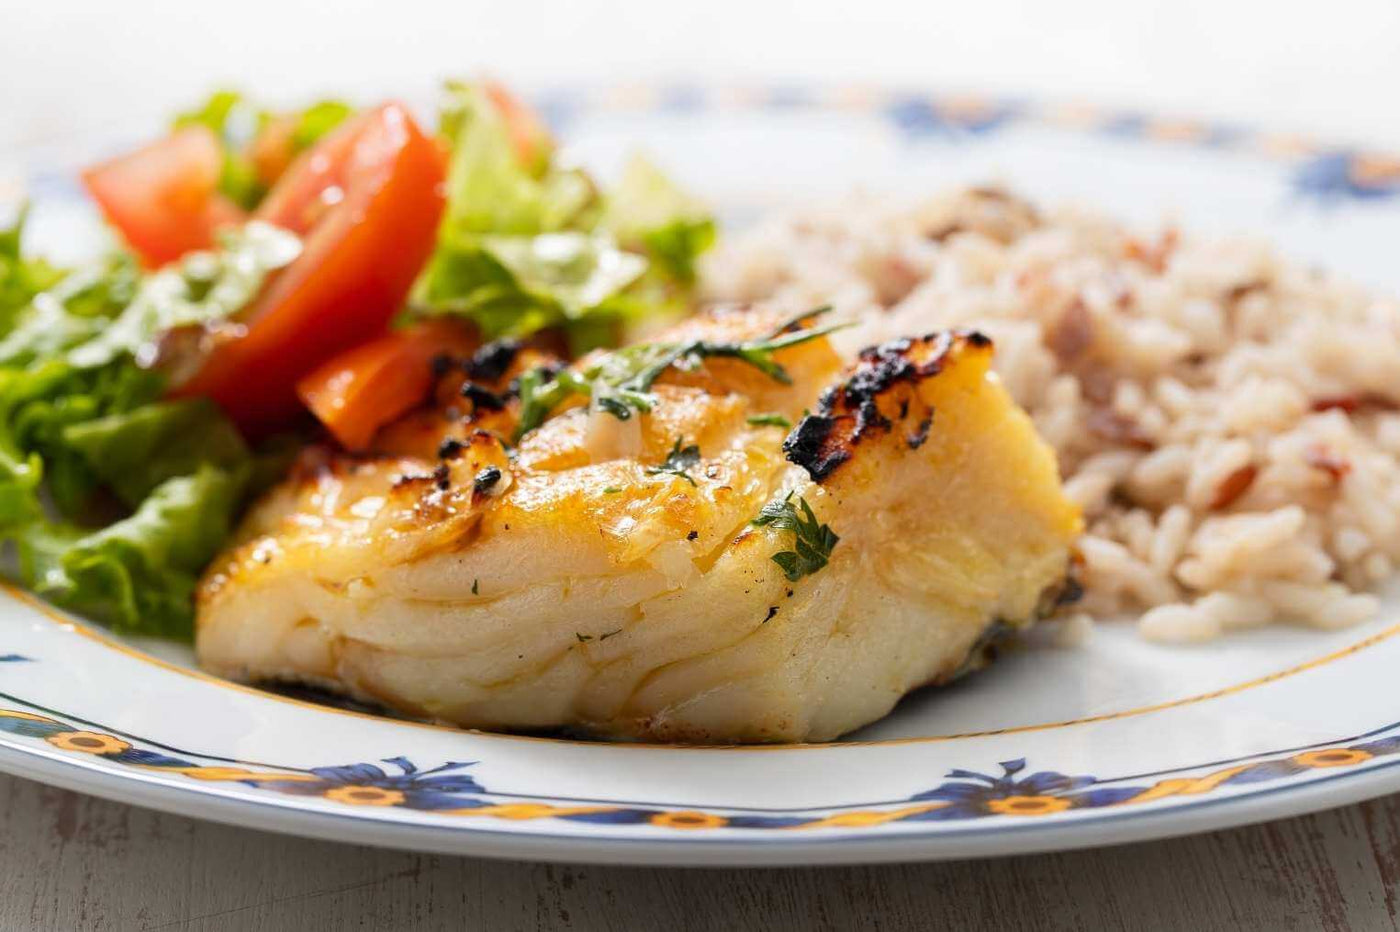 Wild Alaskan Cod grilled with whole grain rice and a side salad